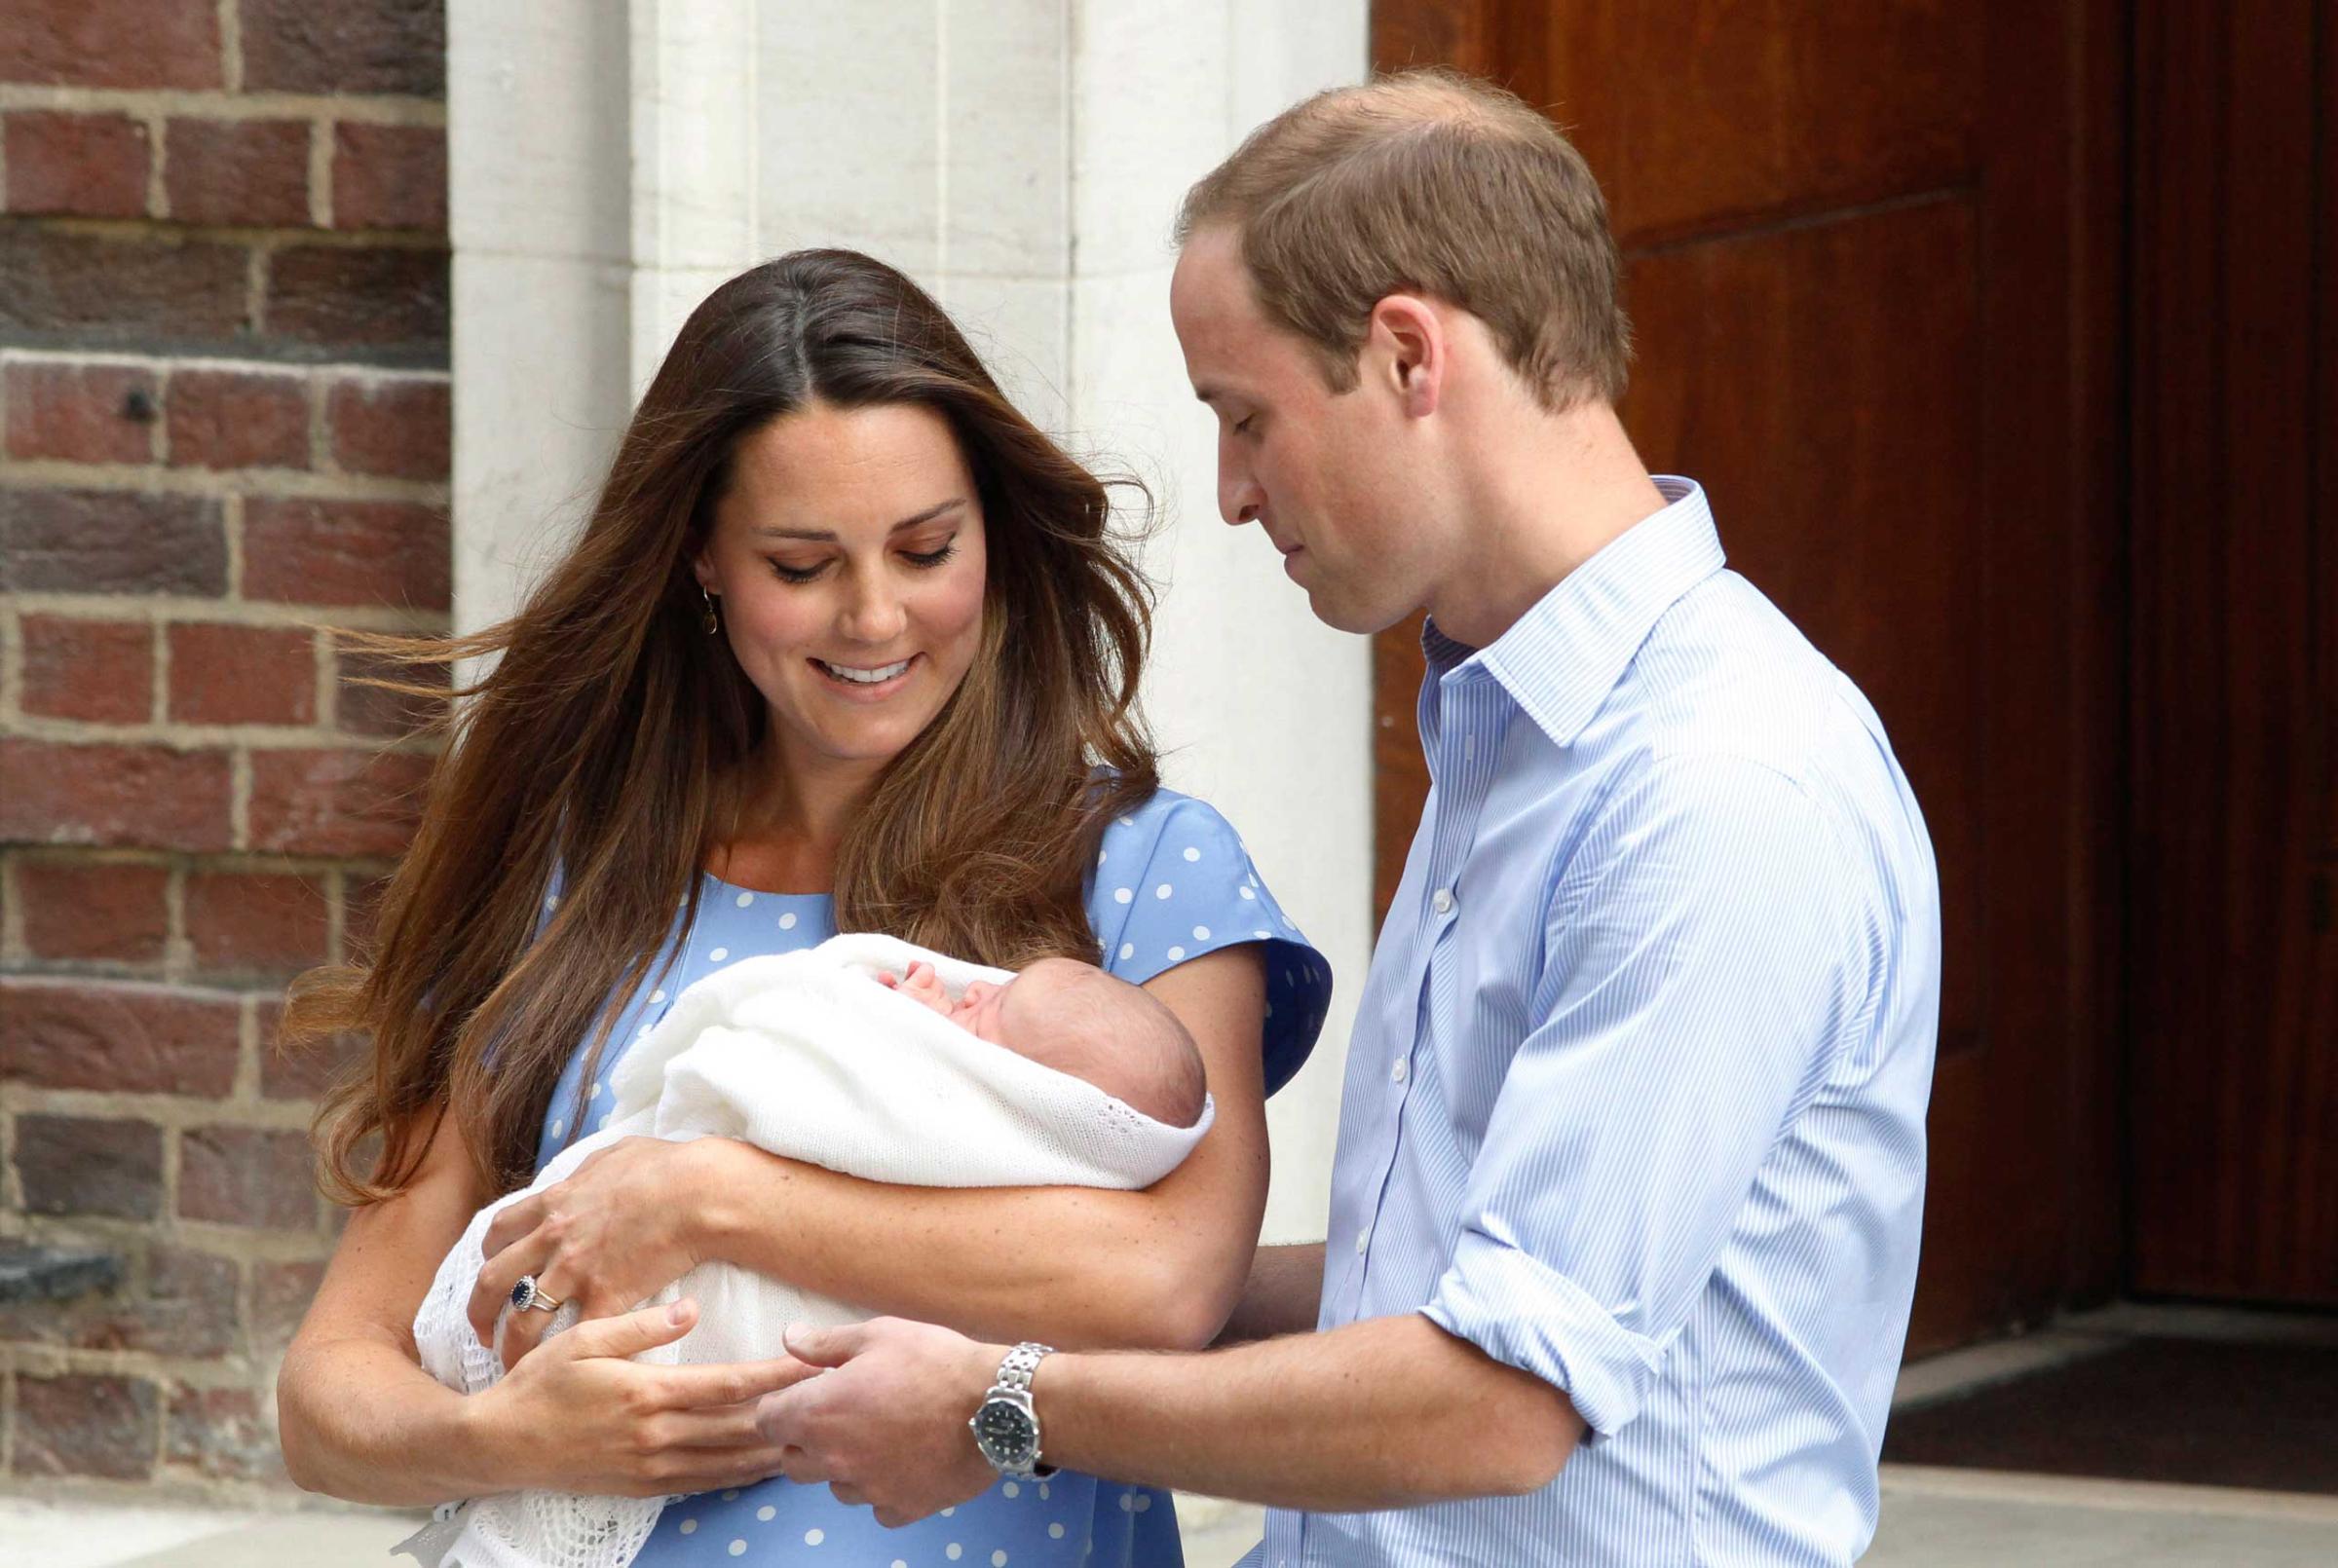 Britain's Prince William, Duke of Cambridge (R) and his wife, Catherine, Duchess of Cambridge (L) depart the Lindo Wing of St. Mary's hospital with their child, in London, Britain, 23 July 2013. The Duchess of Cambridge gave birth to her first child on 22 July 2013. EPA/TAL COHEN